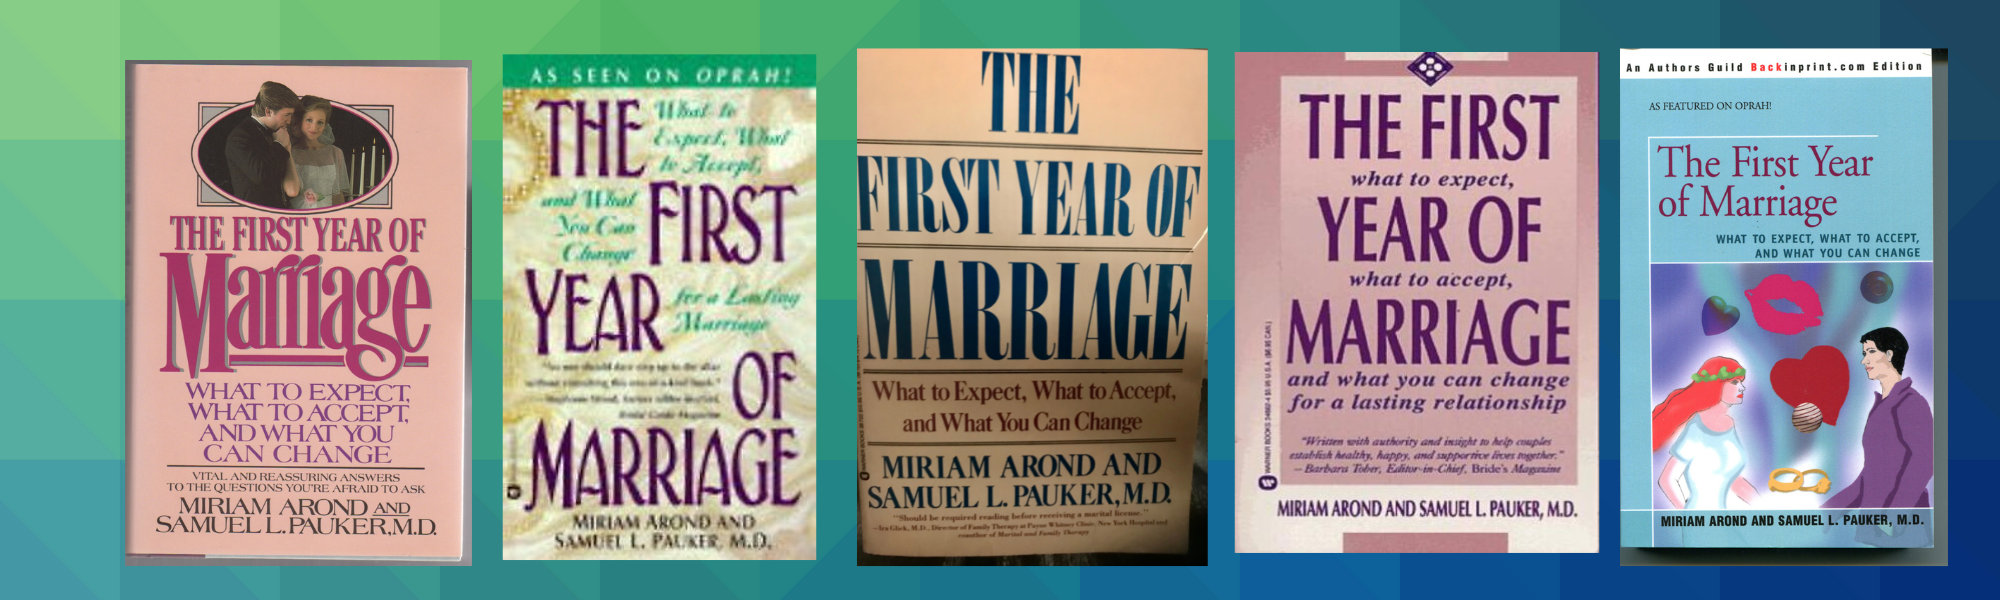 The First Year of Marriage by Miriam Arond and Samuel L.Pauker, M.D.